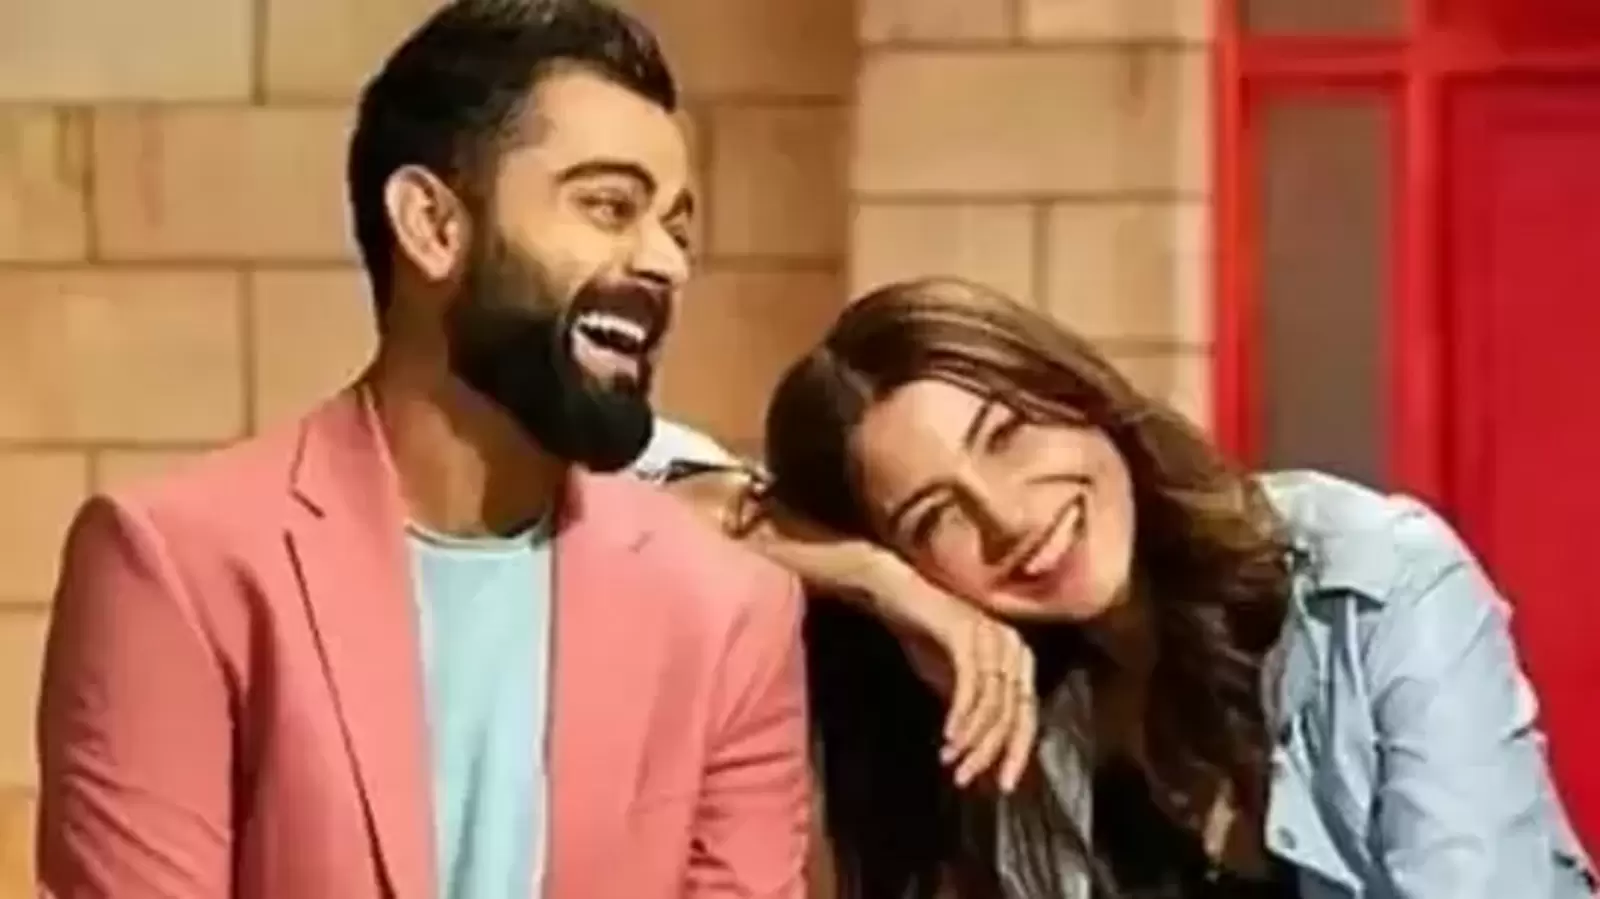 Anushka Sharma applauds Virat Kohli’s ability to laugh at himself as he jokes about his bad form in new video